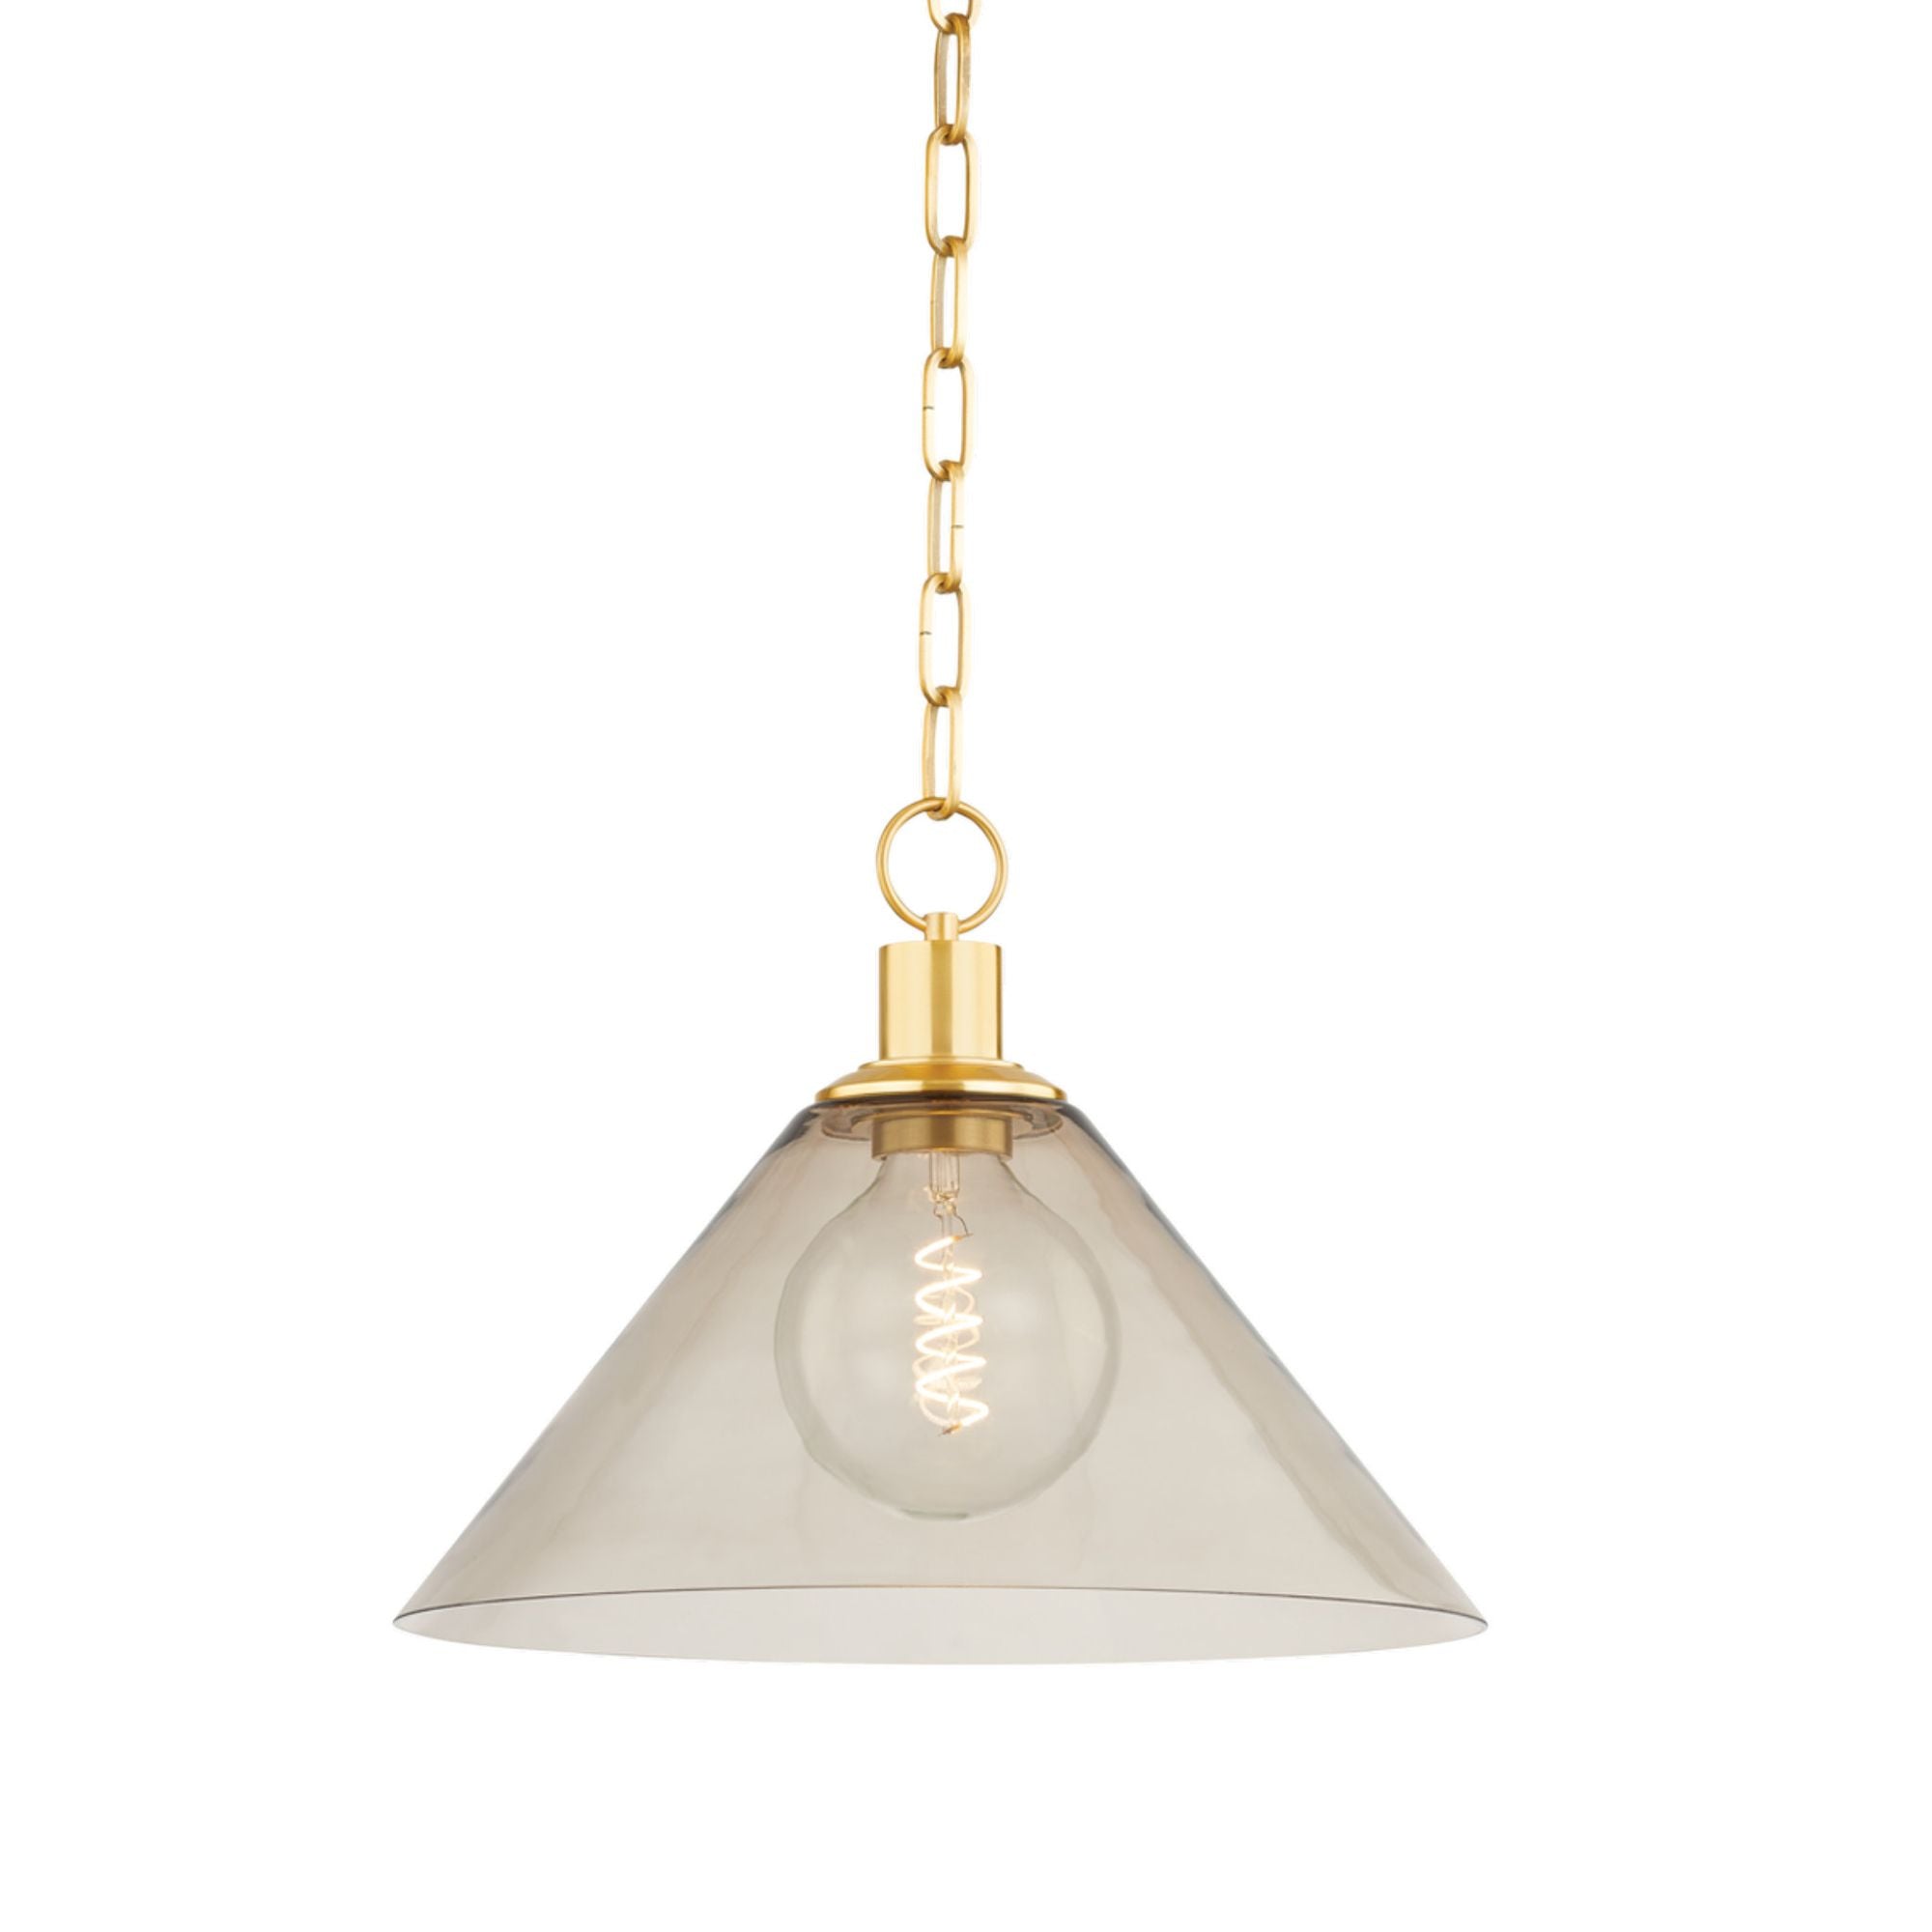 Anniebee 1-Light Pendant in Aged Brass by The Lifestyled Co